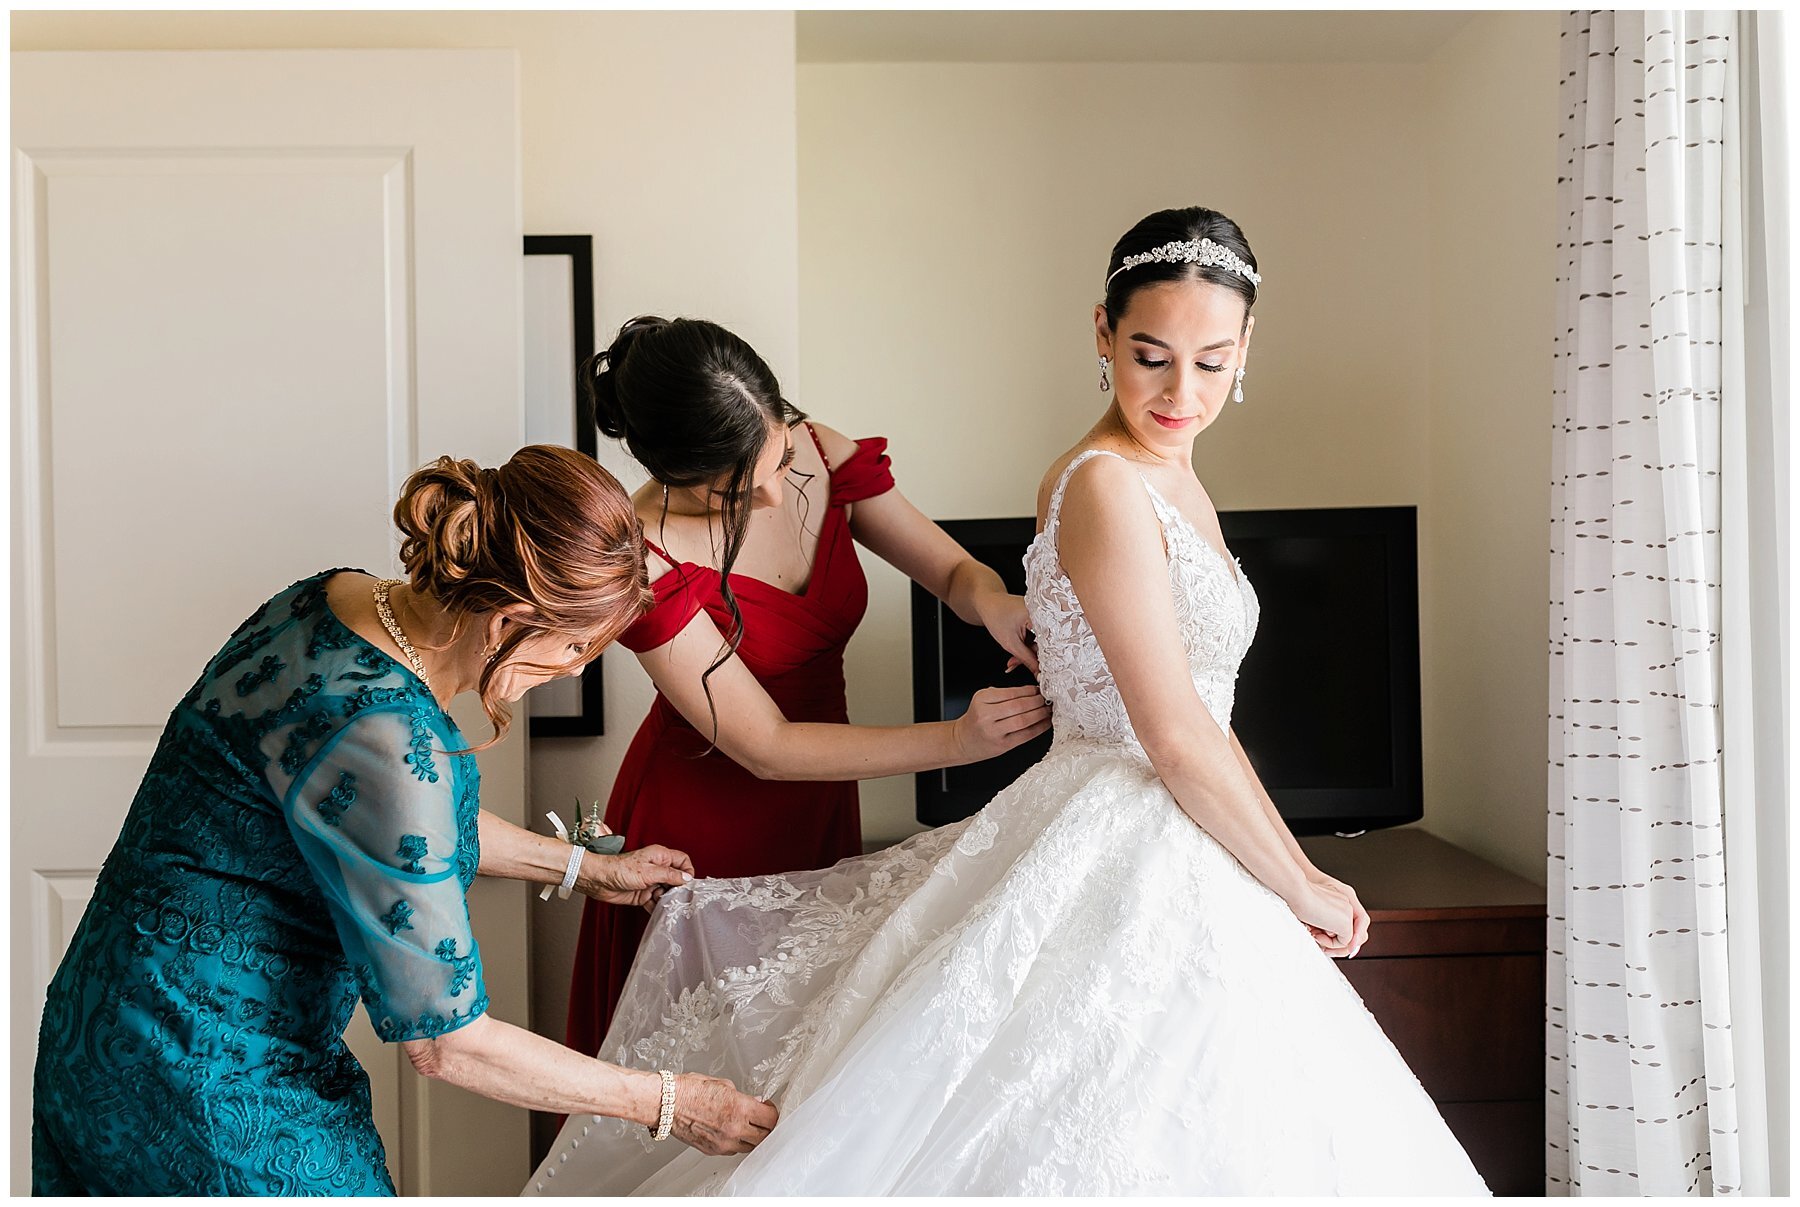  mother of the bride helping her daughter get ready 